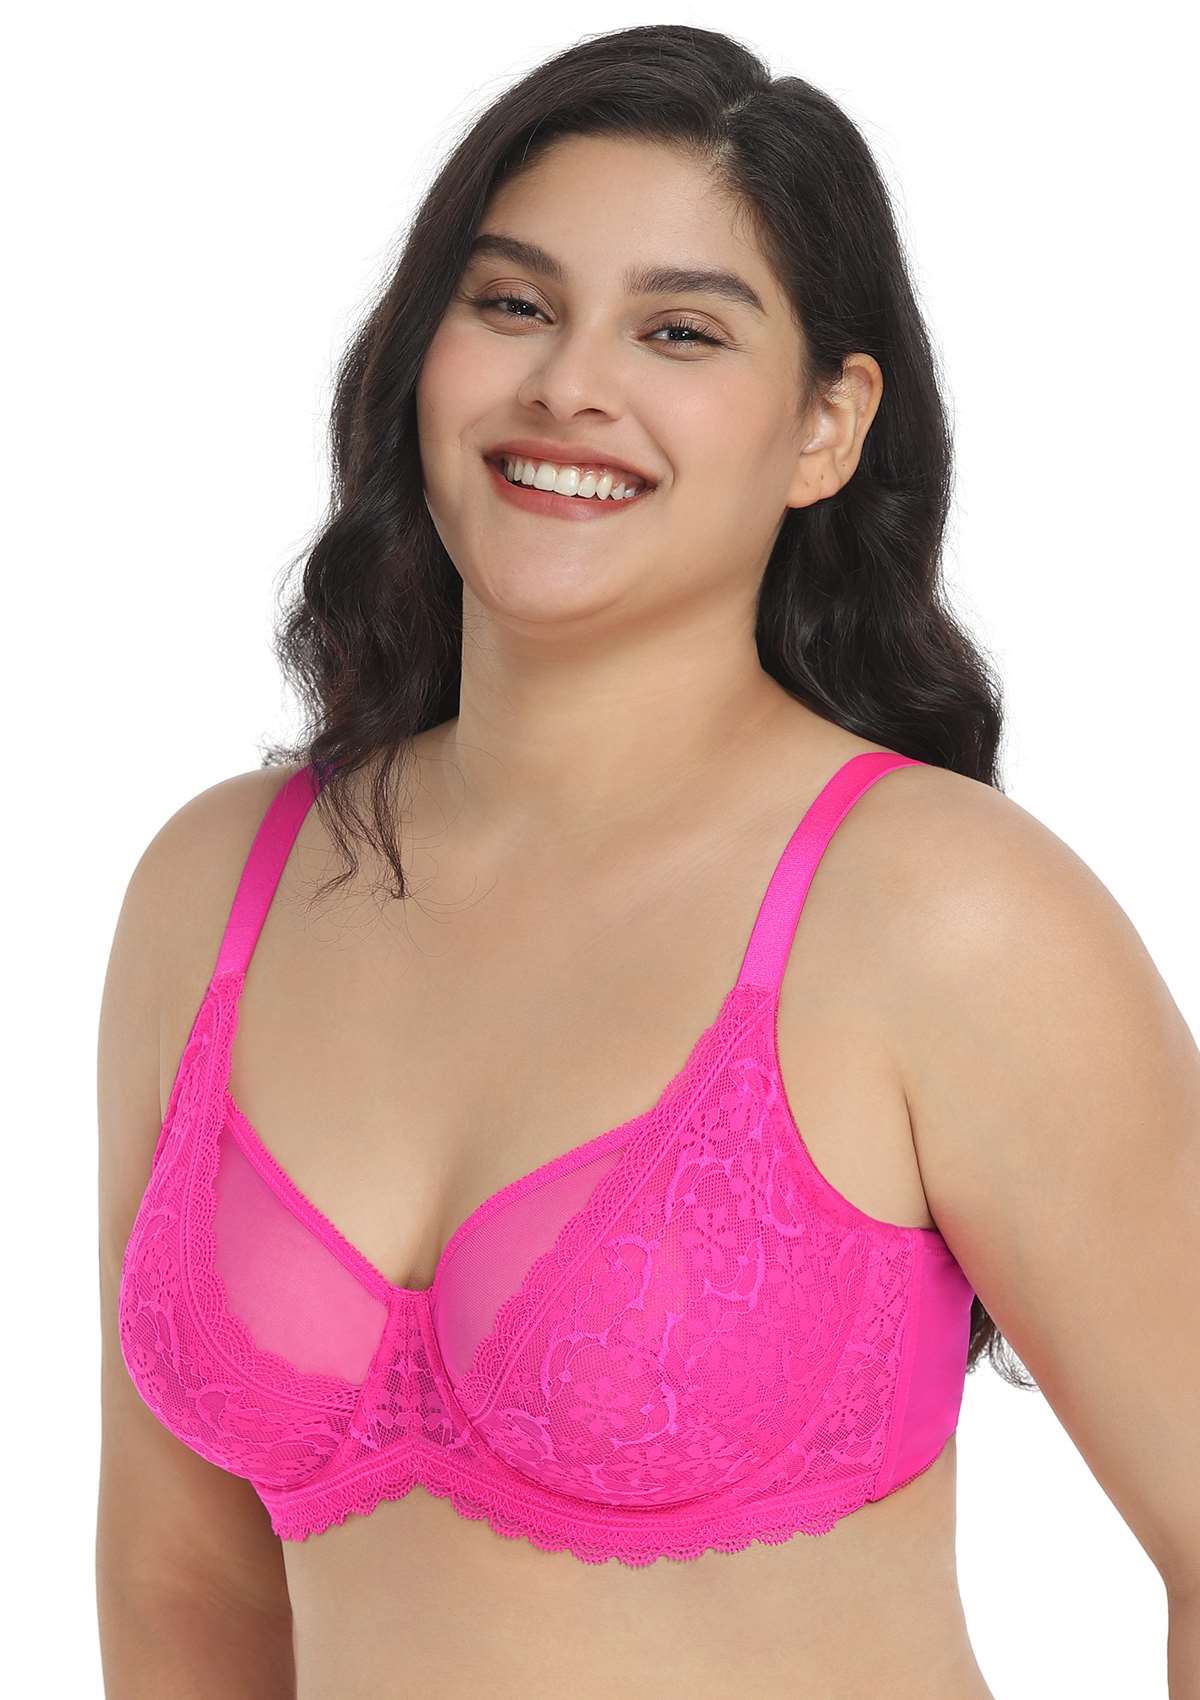 HSIA Anemone Lace Unlined Bra: Supportive, Lightweight Bra - Ginger / 42 / C